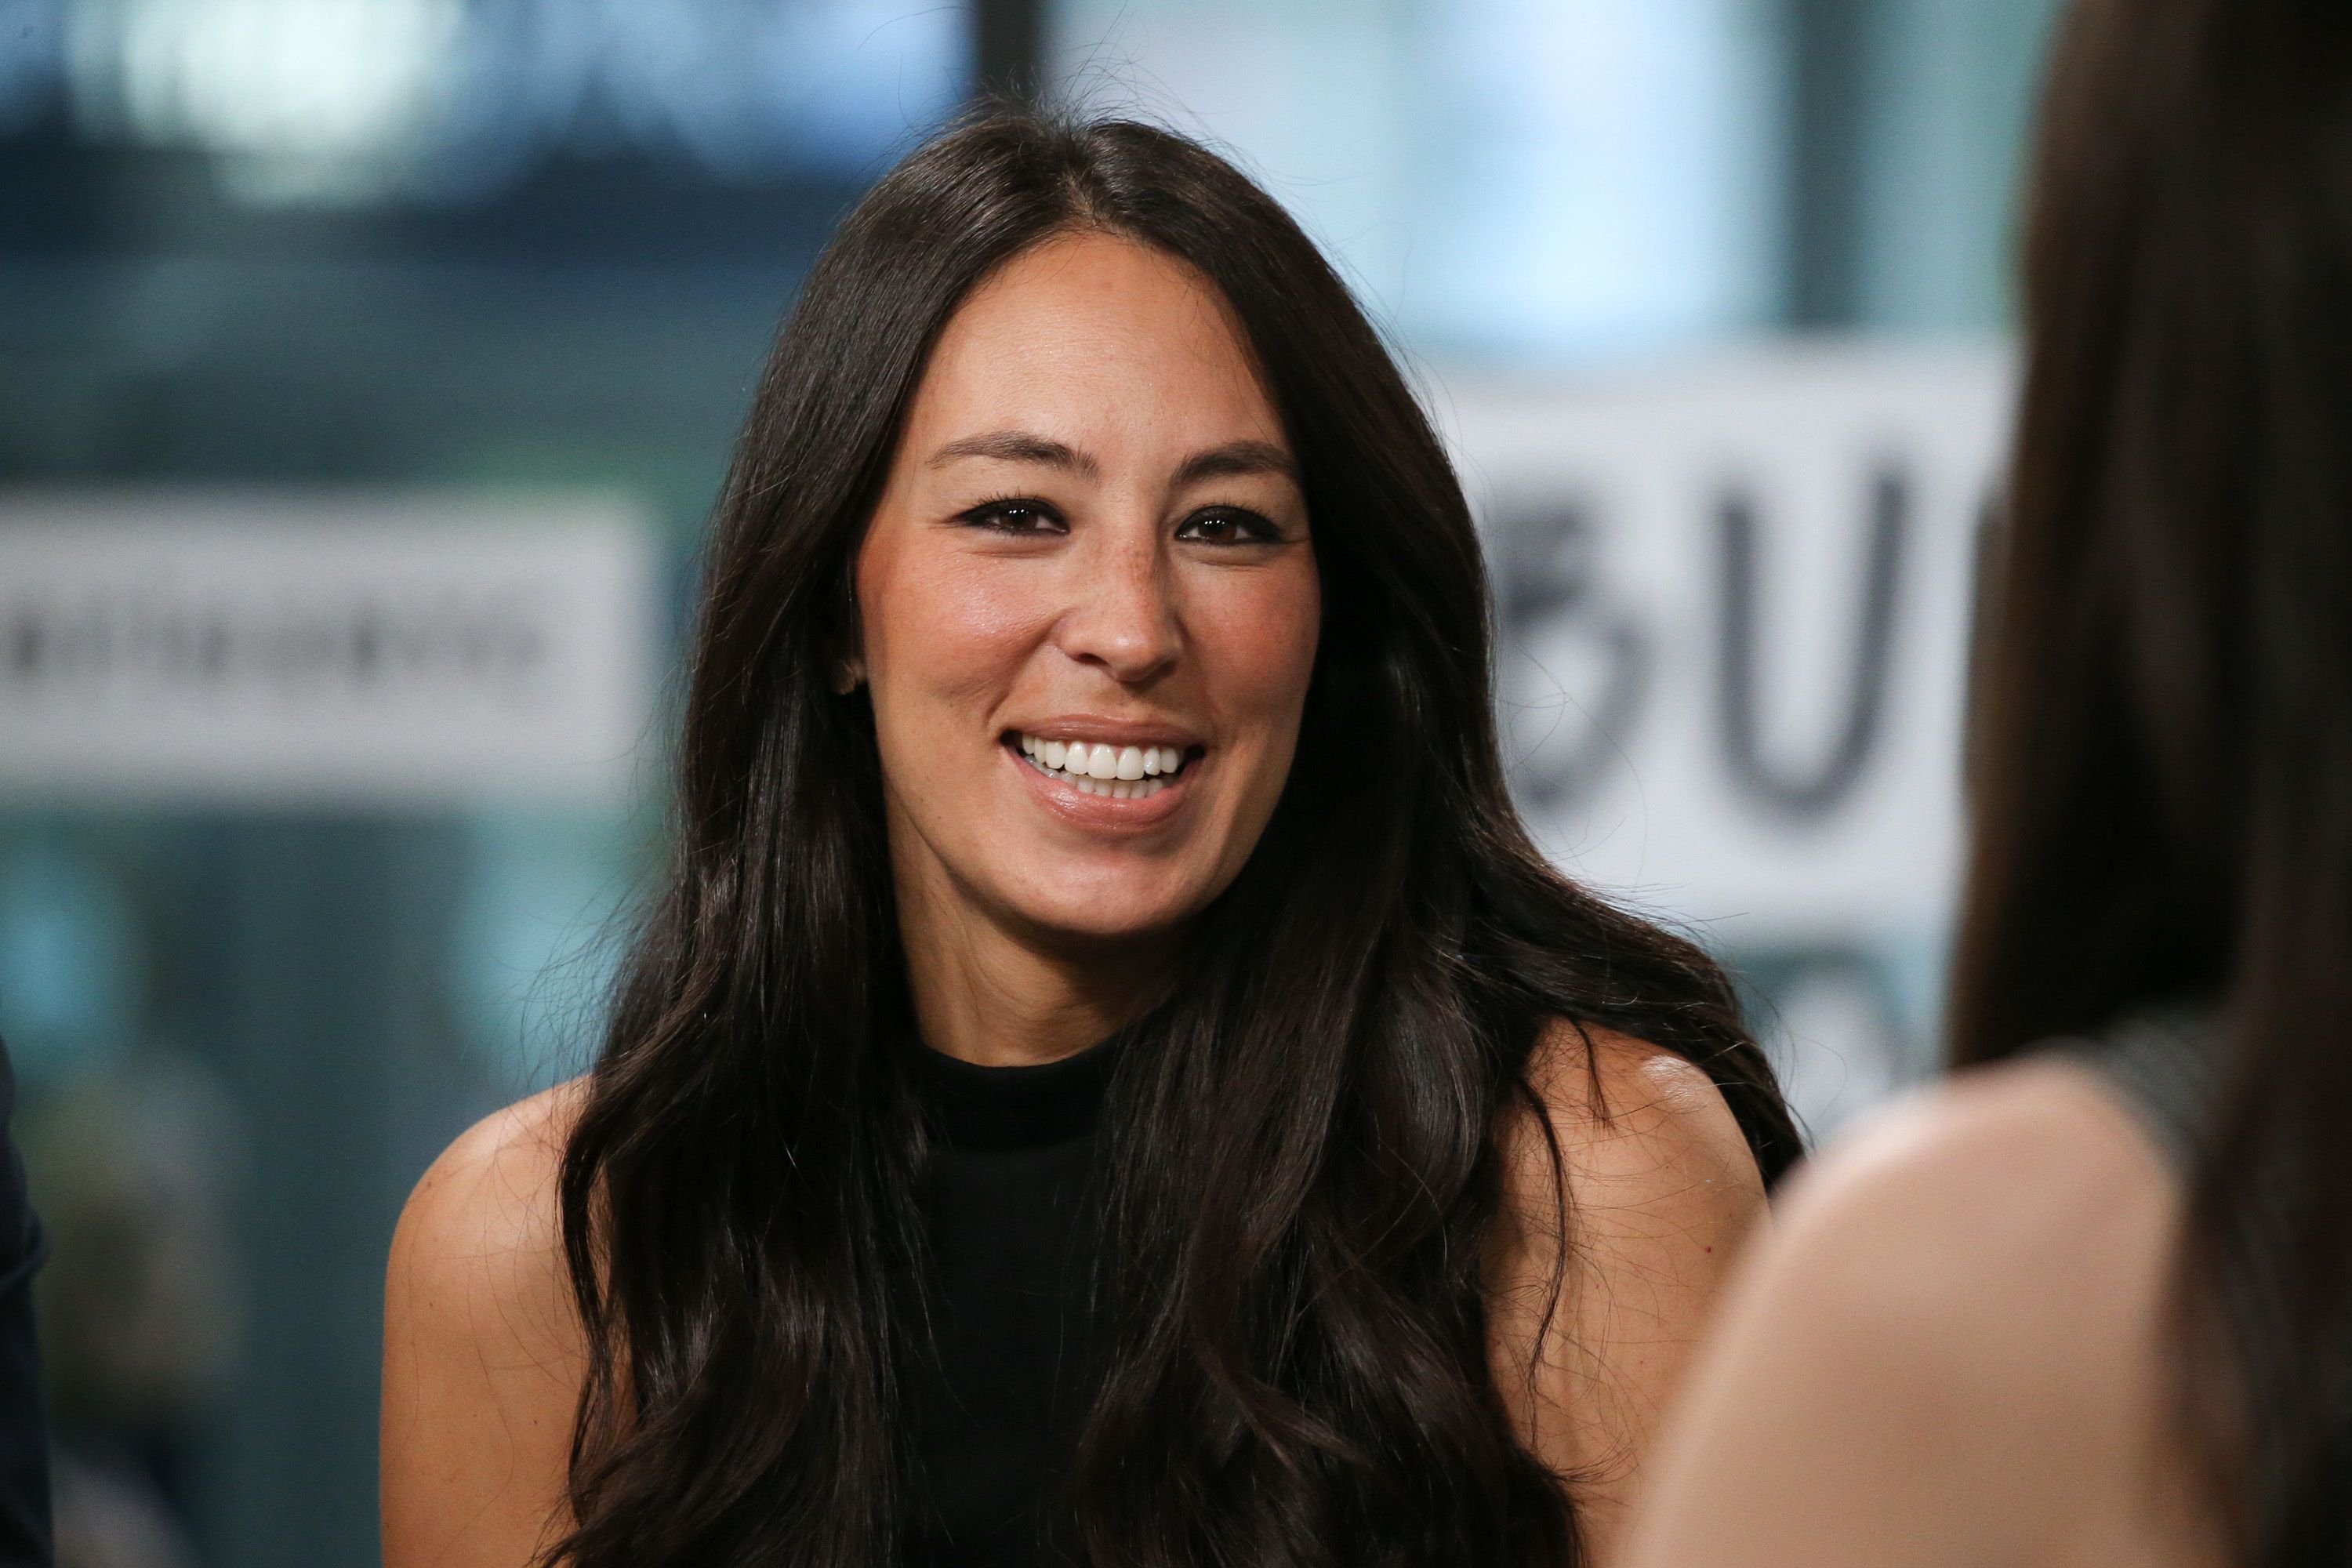 Joanna Gaines discusses her book, "Capital Gaines: Smart Things I Learned Doing Stupid Stuff"  on October 18, 2017 | Getty Images